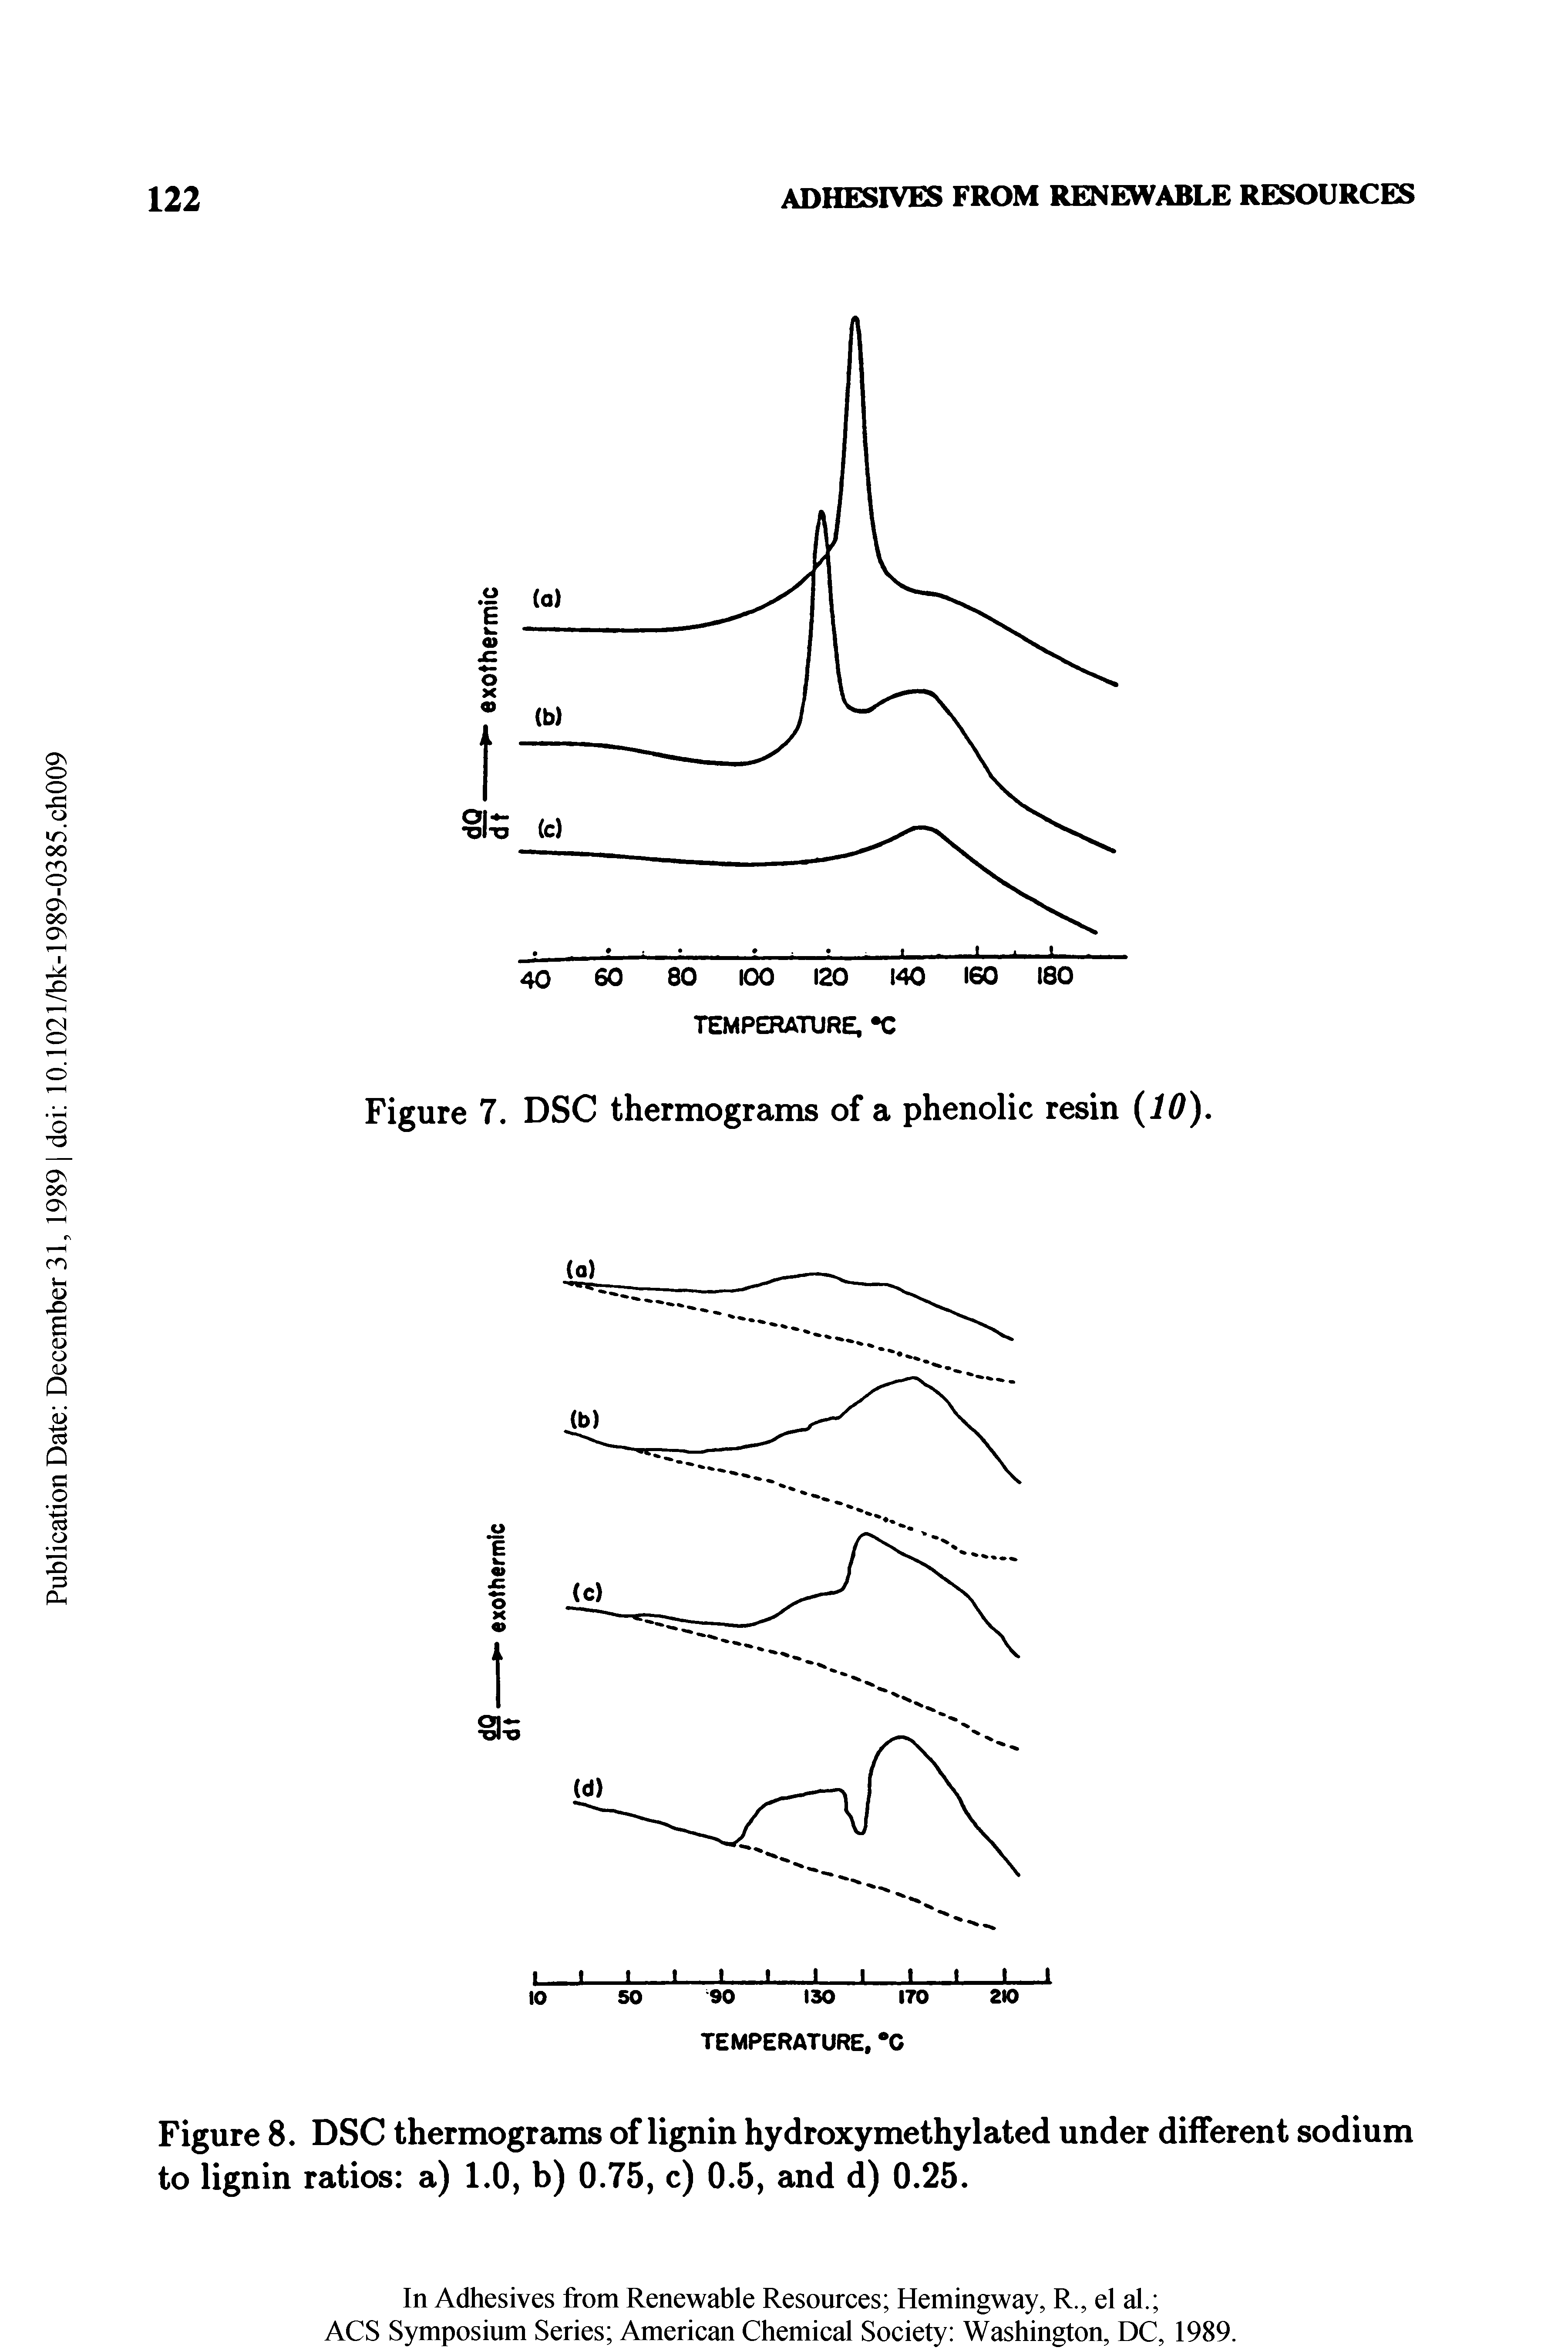 Figure 8. DSC thermograms of lignin hydroxymethylated under different sodium to lignin ratios a) 1.0, b) 0.75, c) 0.5, and d) 0.25.